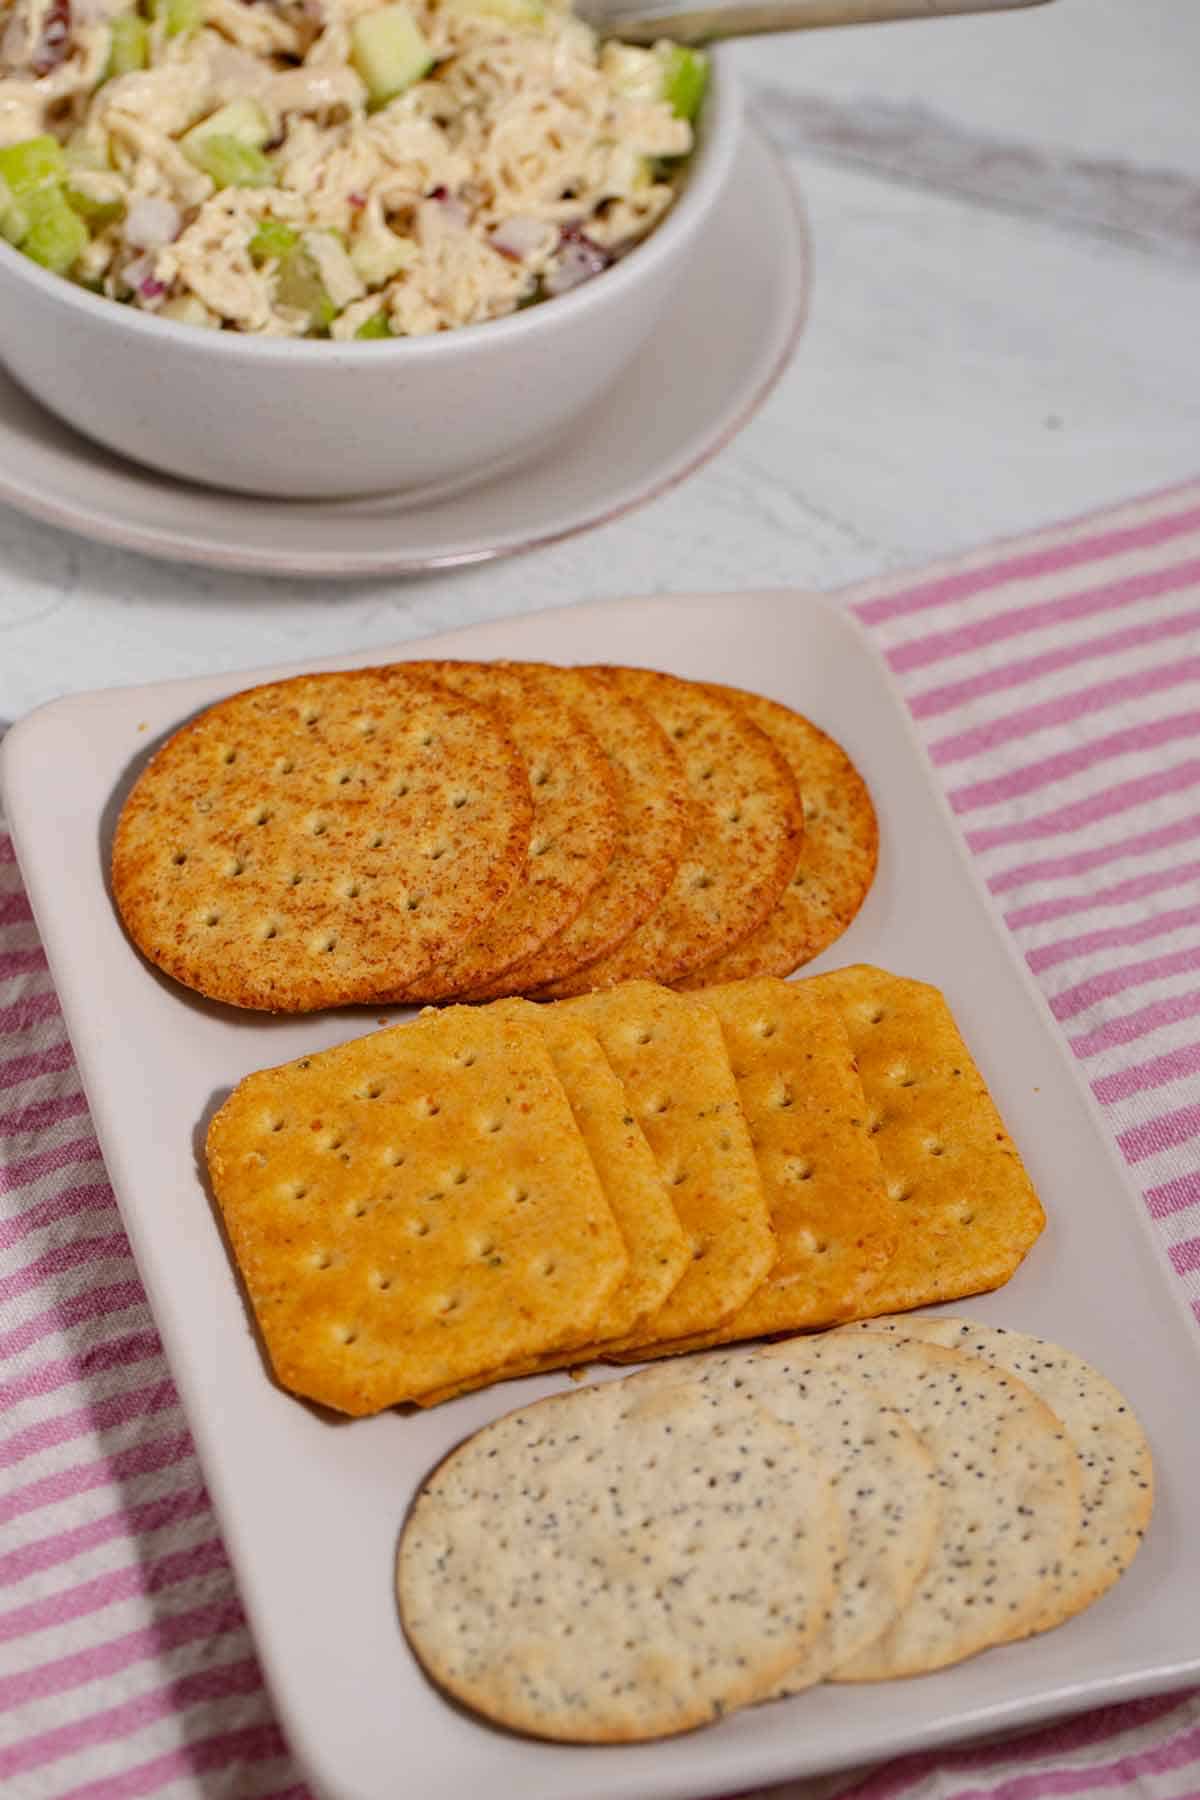 Chicken salad in a bowl to be served with a plate of crackers instead of bread.